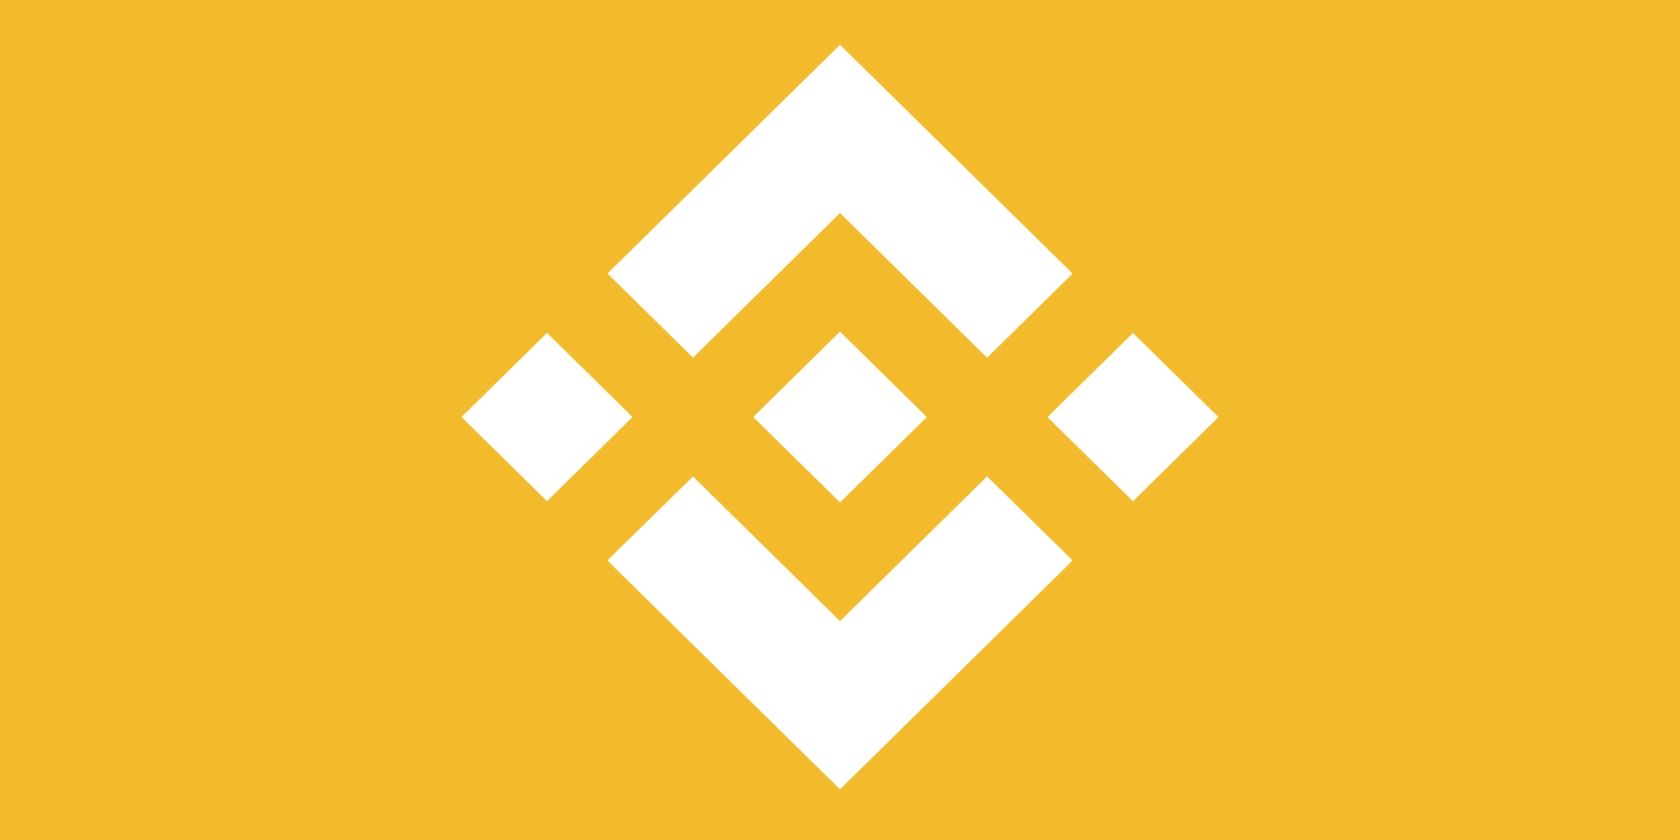 A Picture of Binance Logo